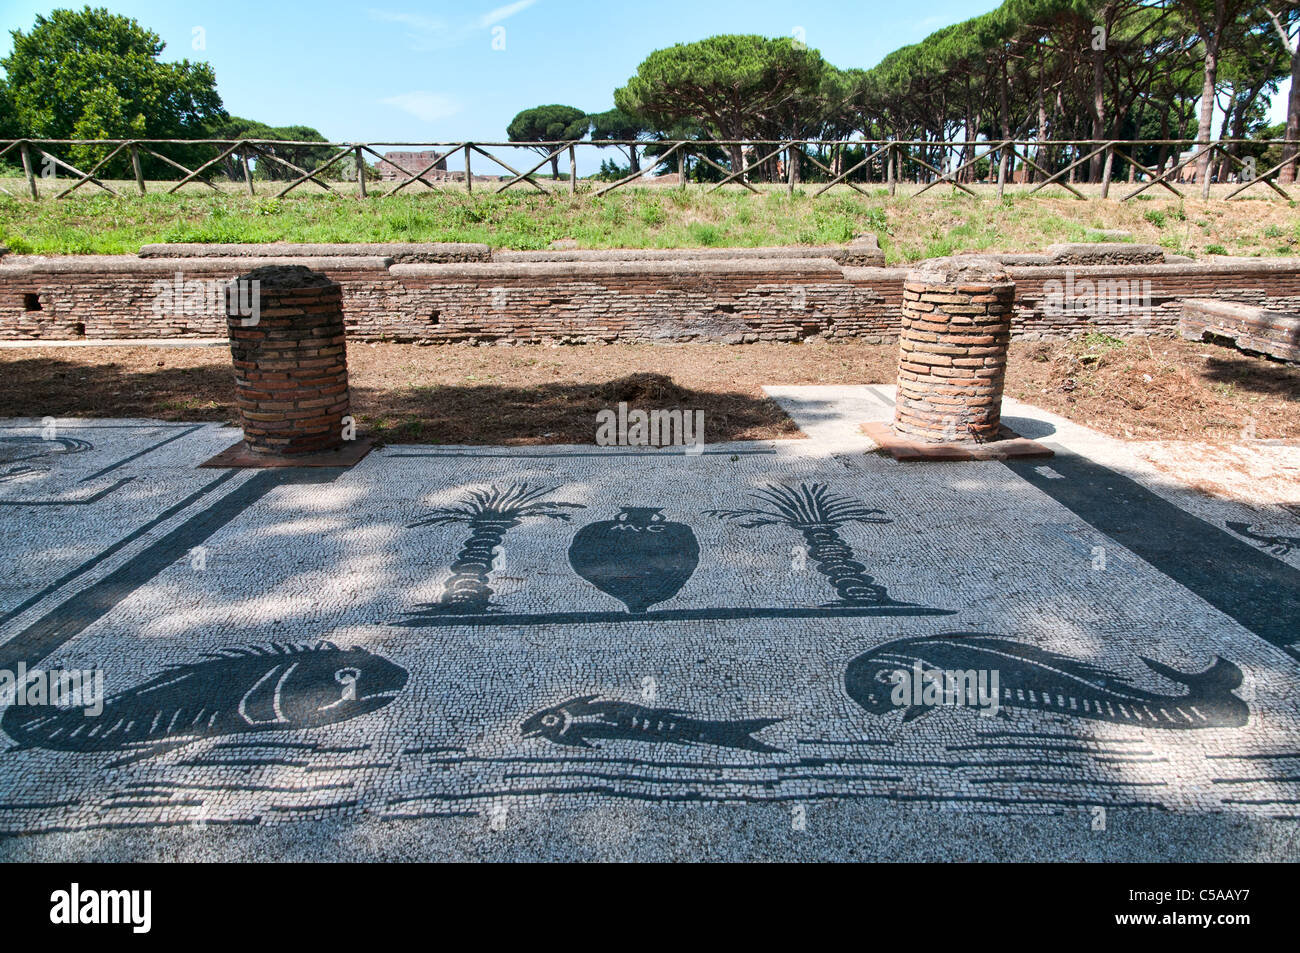 The ruins of the ancient roman port of Ostia, nearby Rome. Stock Photo